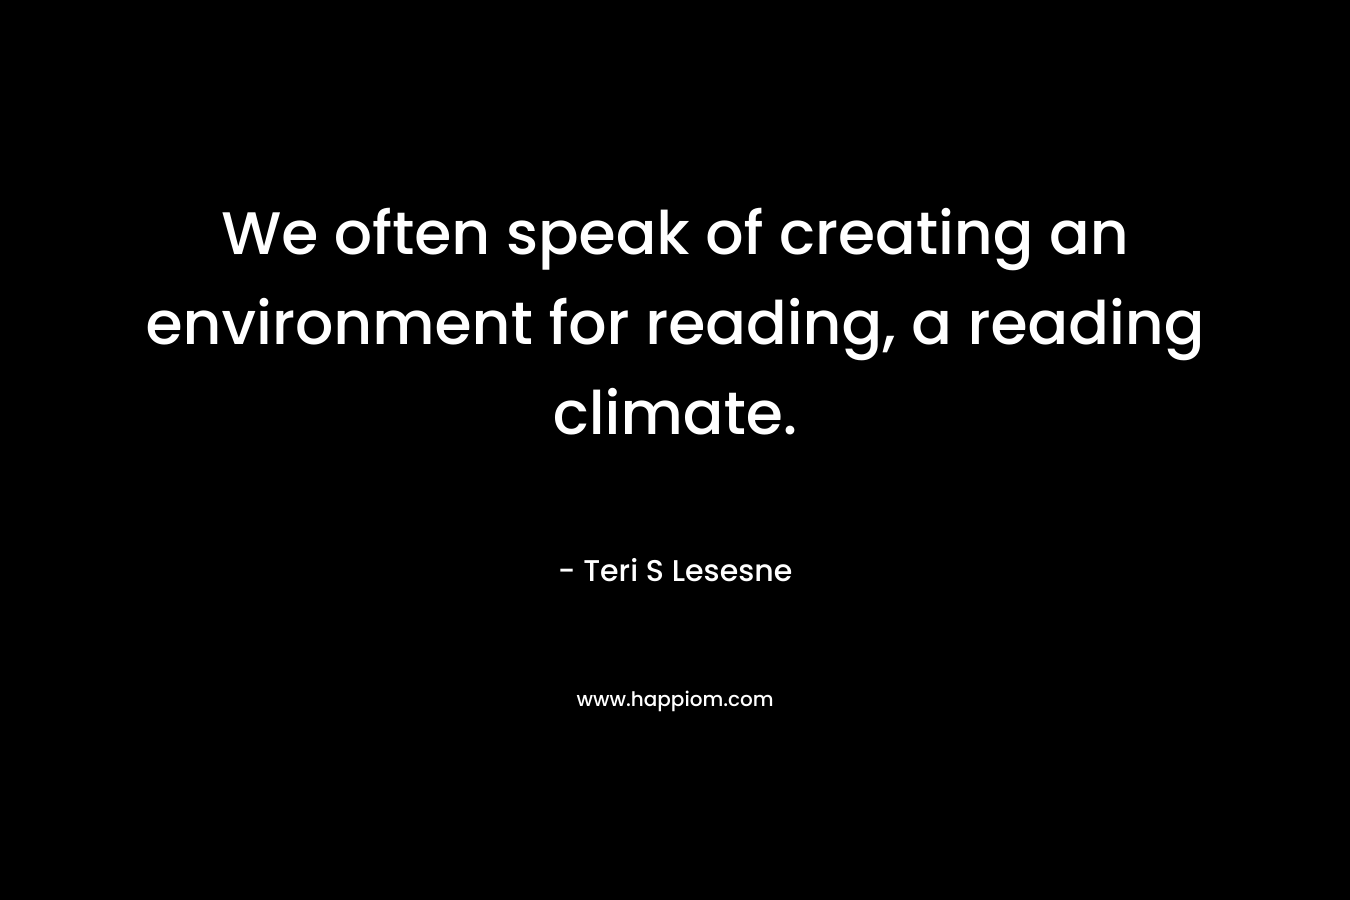 We often speak of creating an environment for reading, a reading climate. – Teri S Lesesne